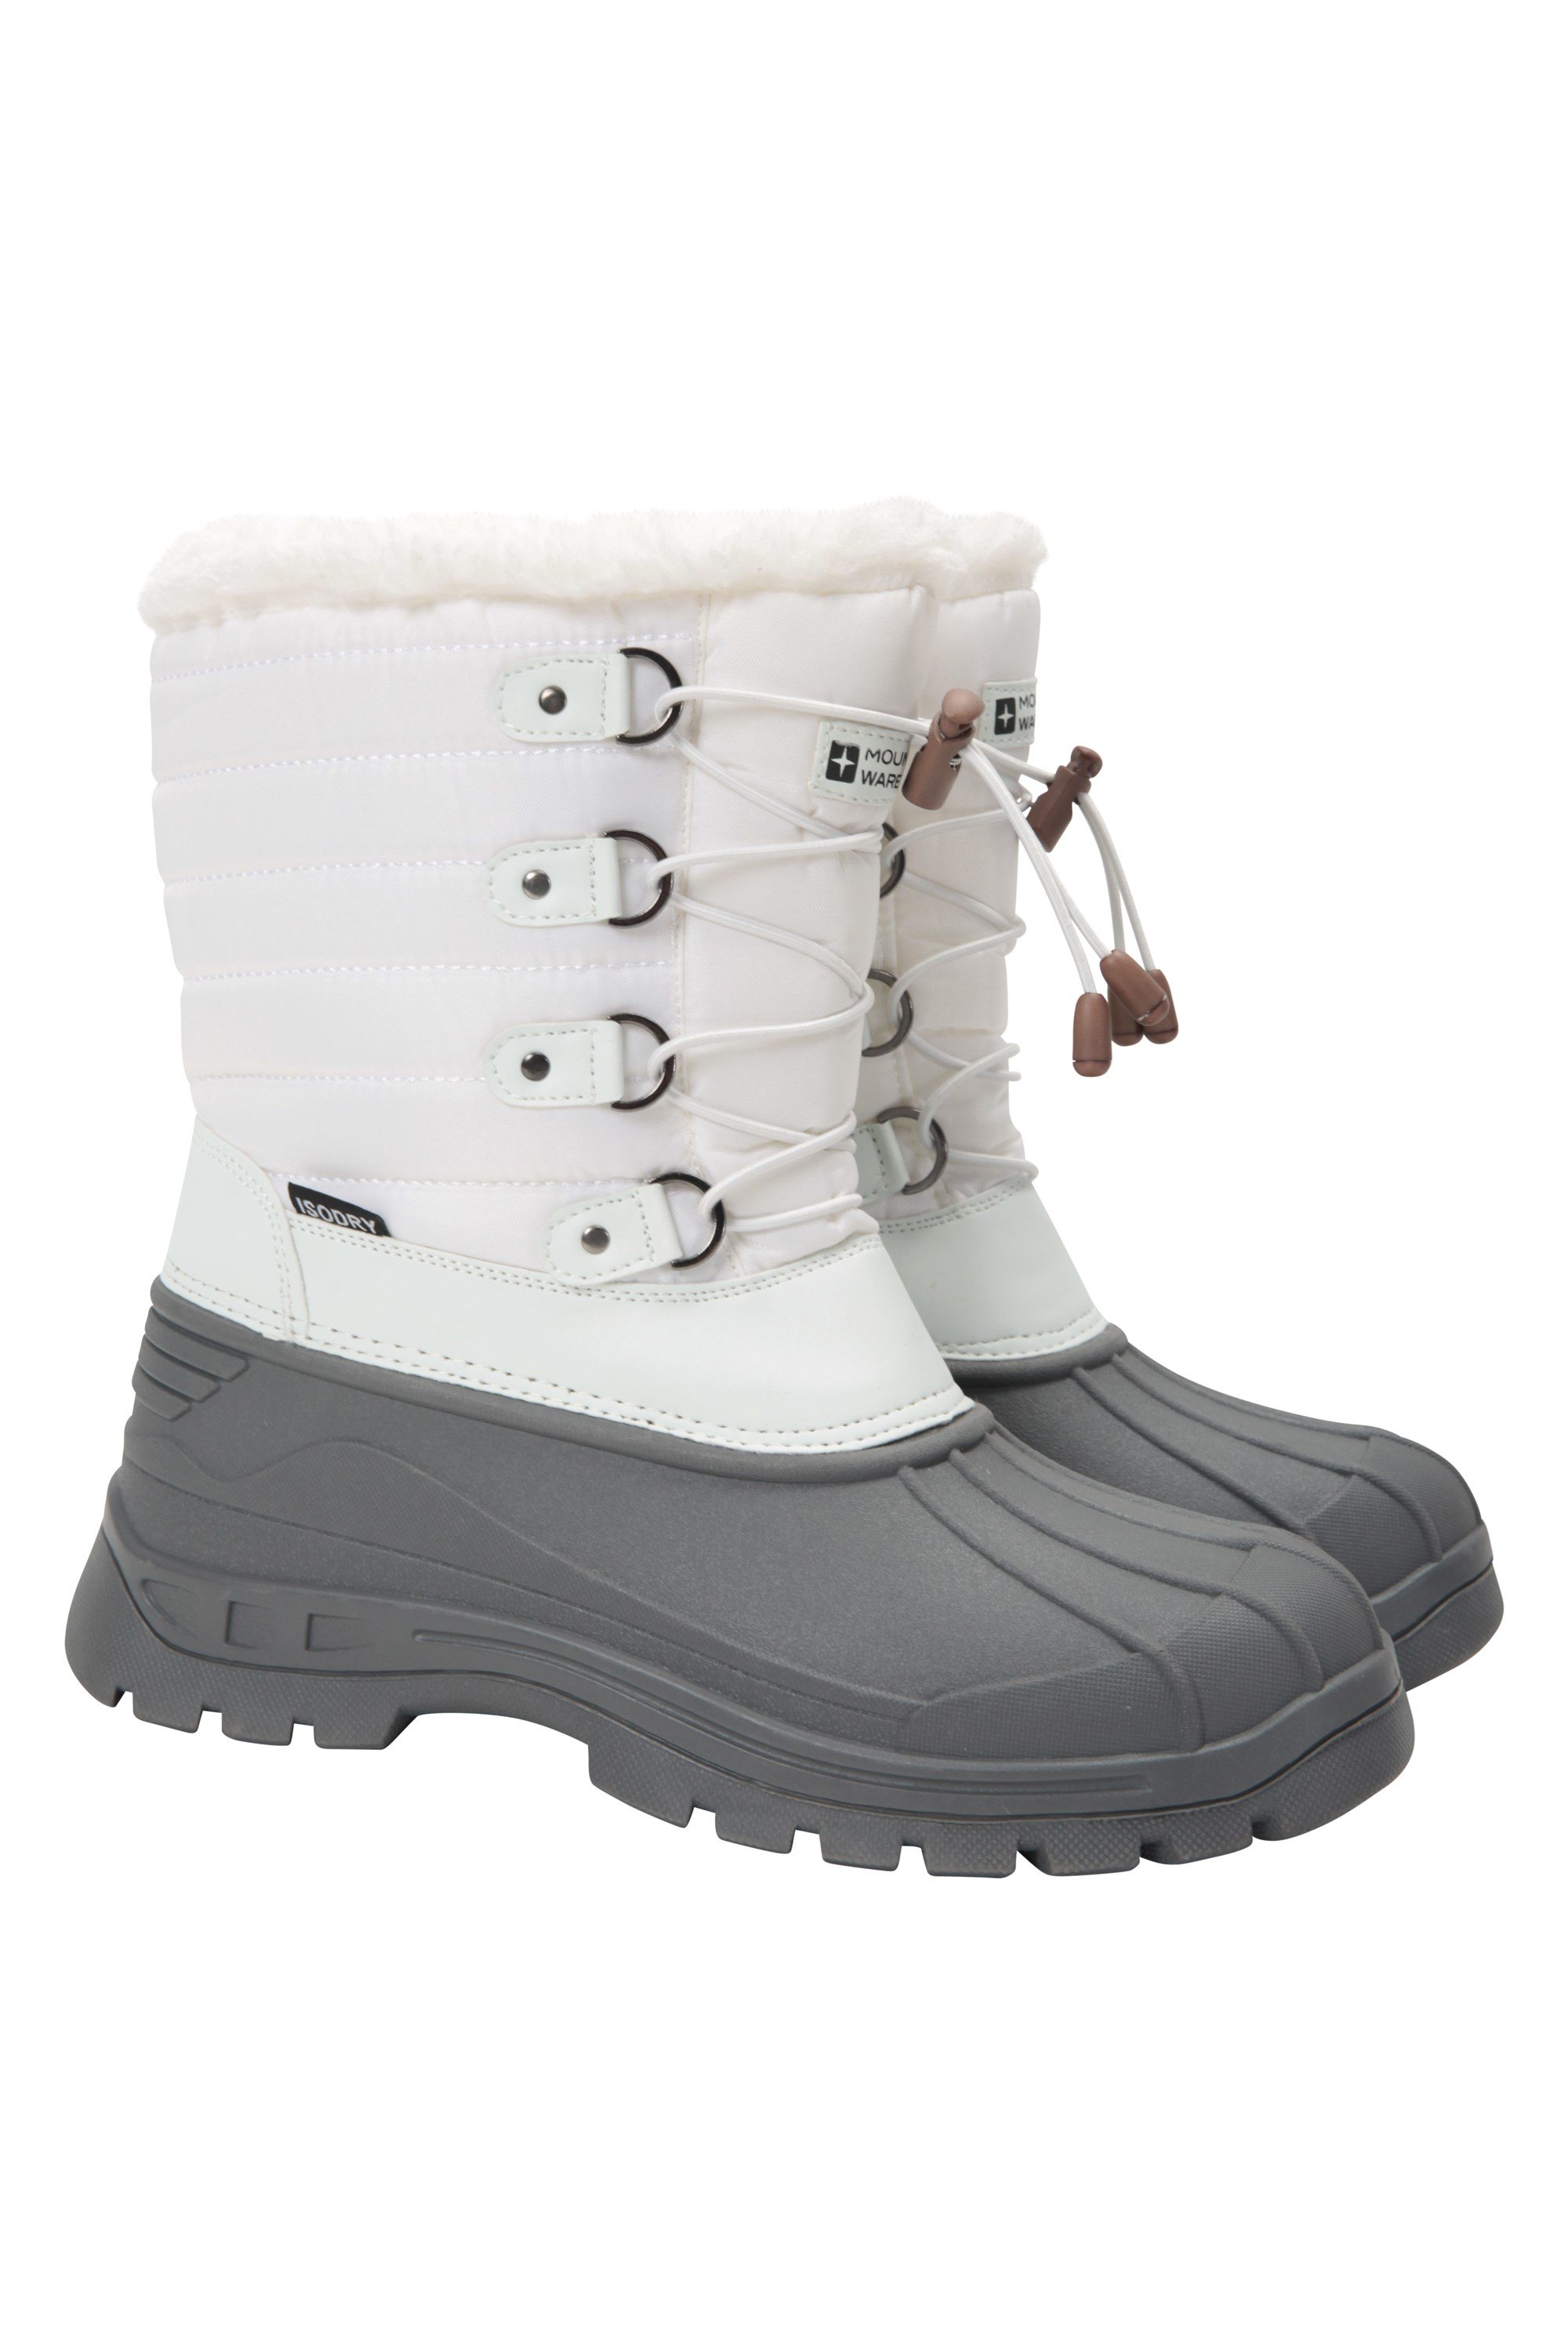 inexpensive womens snow boots